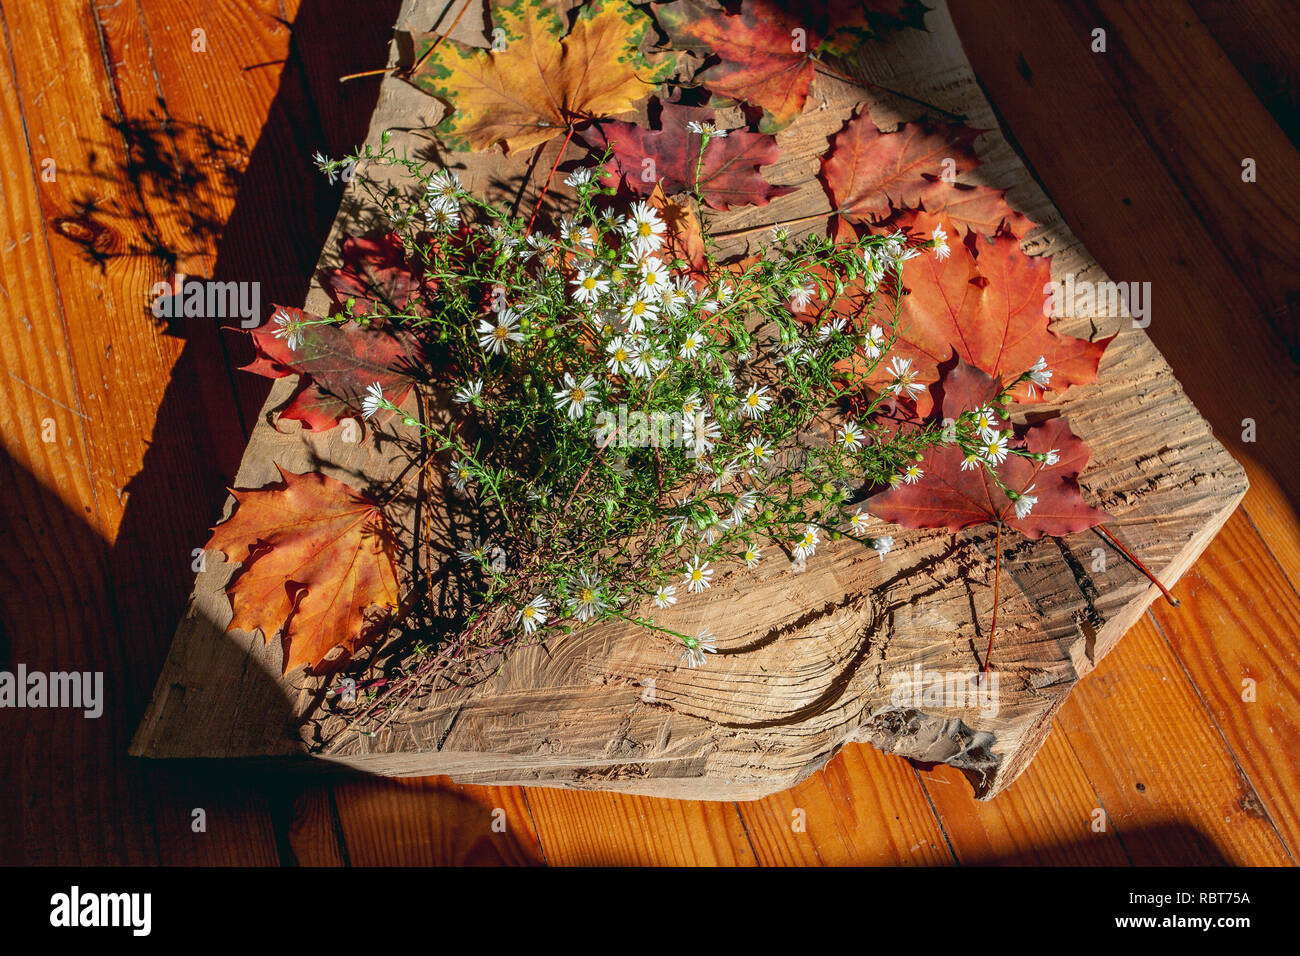 Fresh flowers and beautiful autumn leaves on a wooden board. Still life. Stock Photo